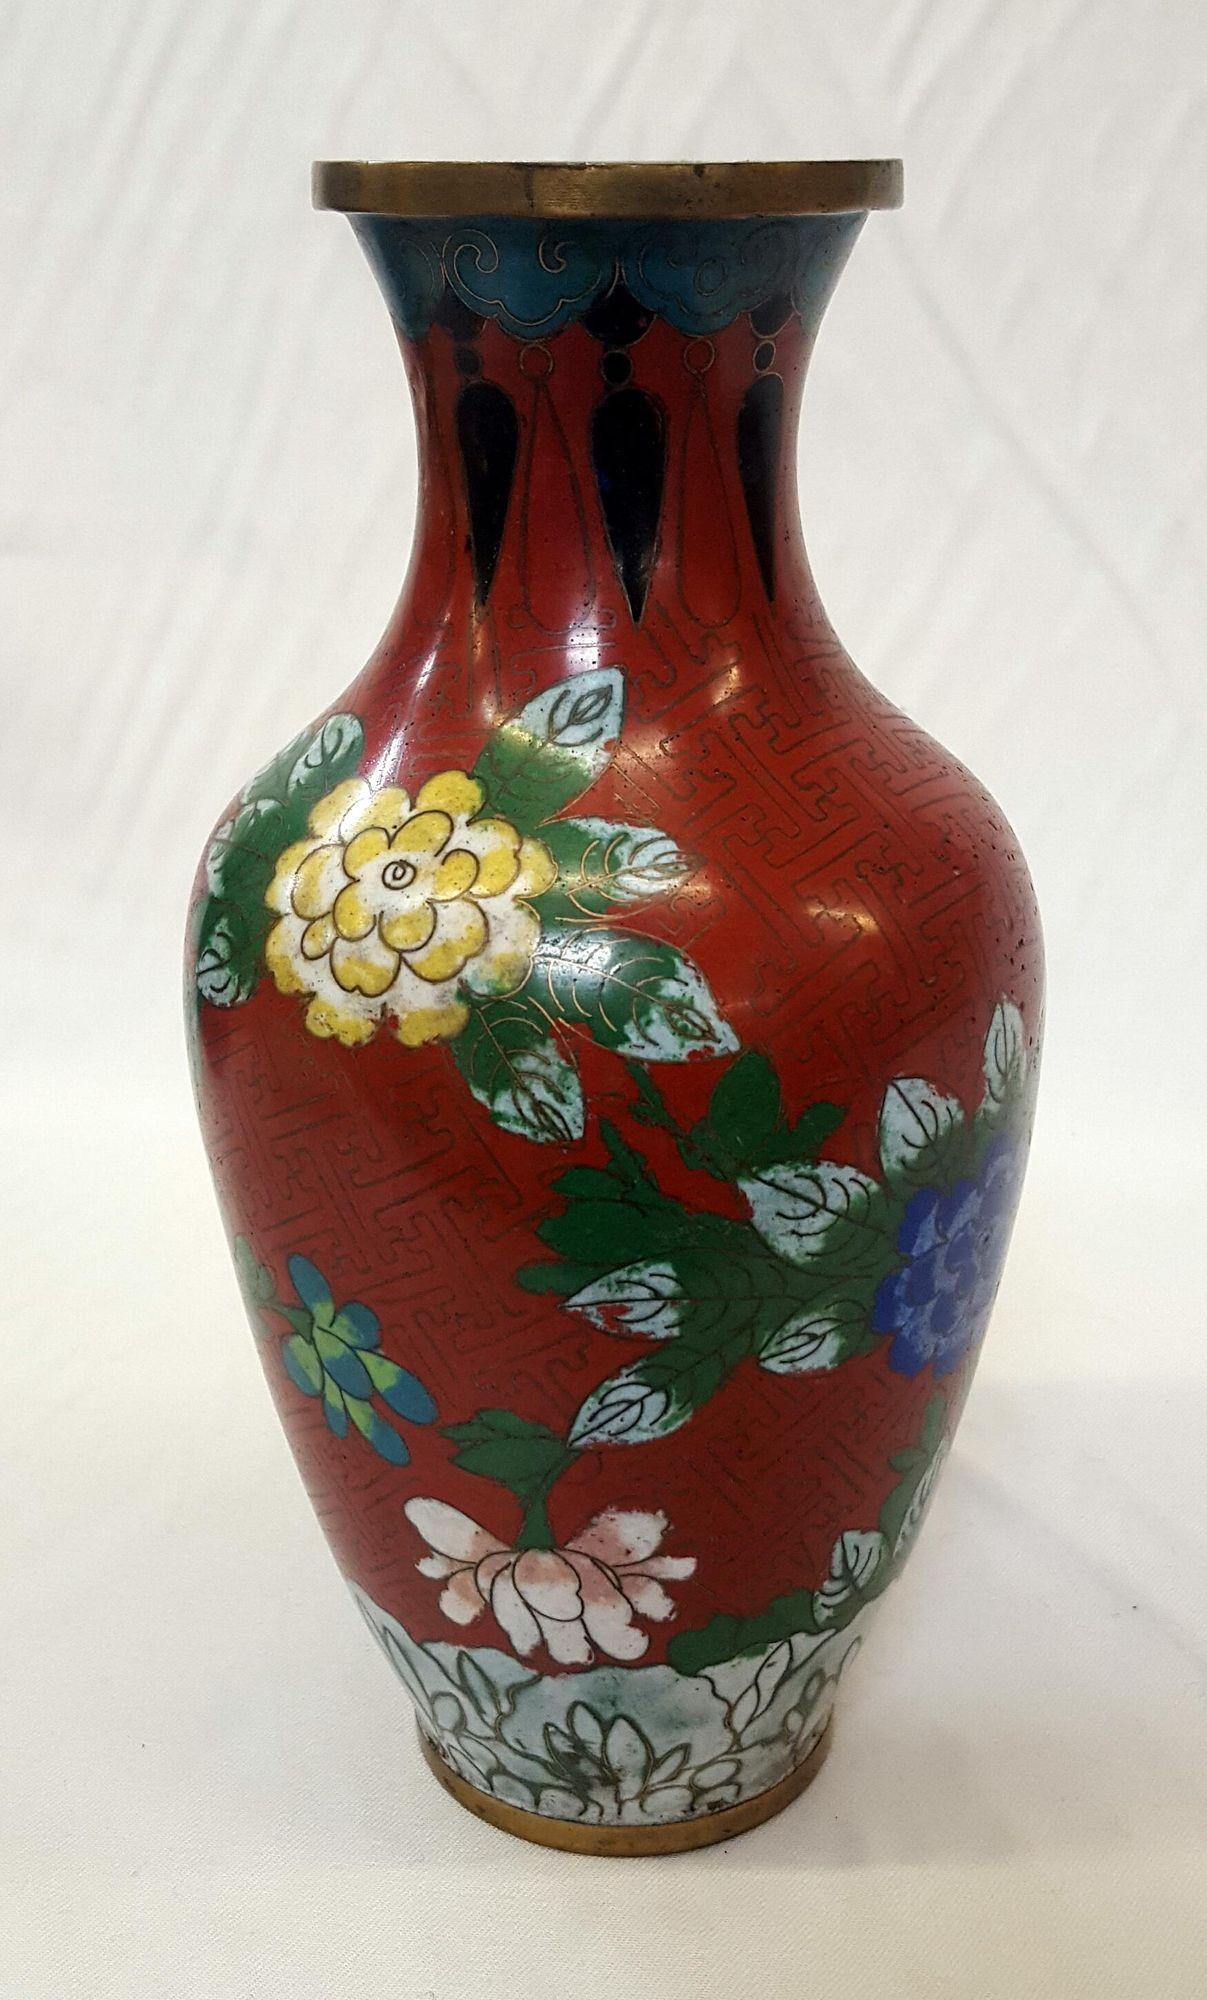 Chinese floral champleve vase enamel-over-brass Vintage.

Origin: China
Dimensions: 9-1/4 inches tall X 5 inches wide X 5 inches deep
Colors: Red, green, black, violet, pink, blue, yellow and brass
Condition/Info: Vintage floral design Chinese